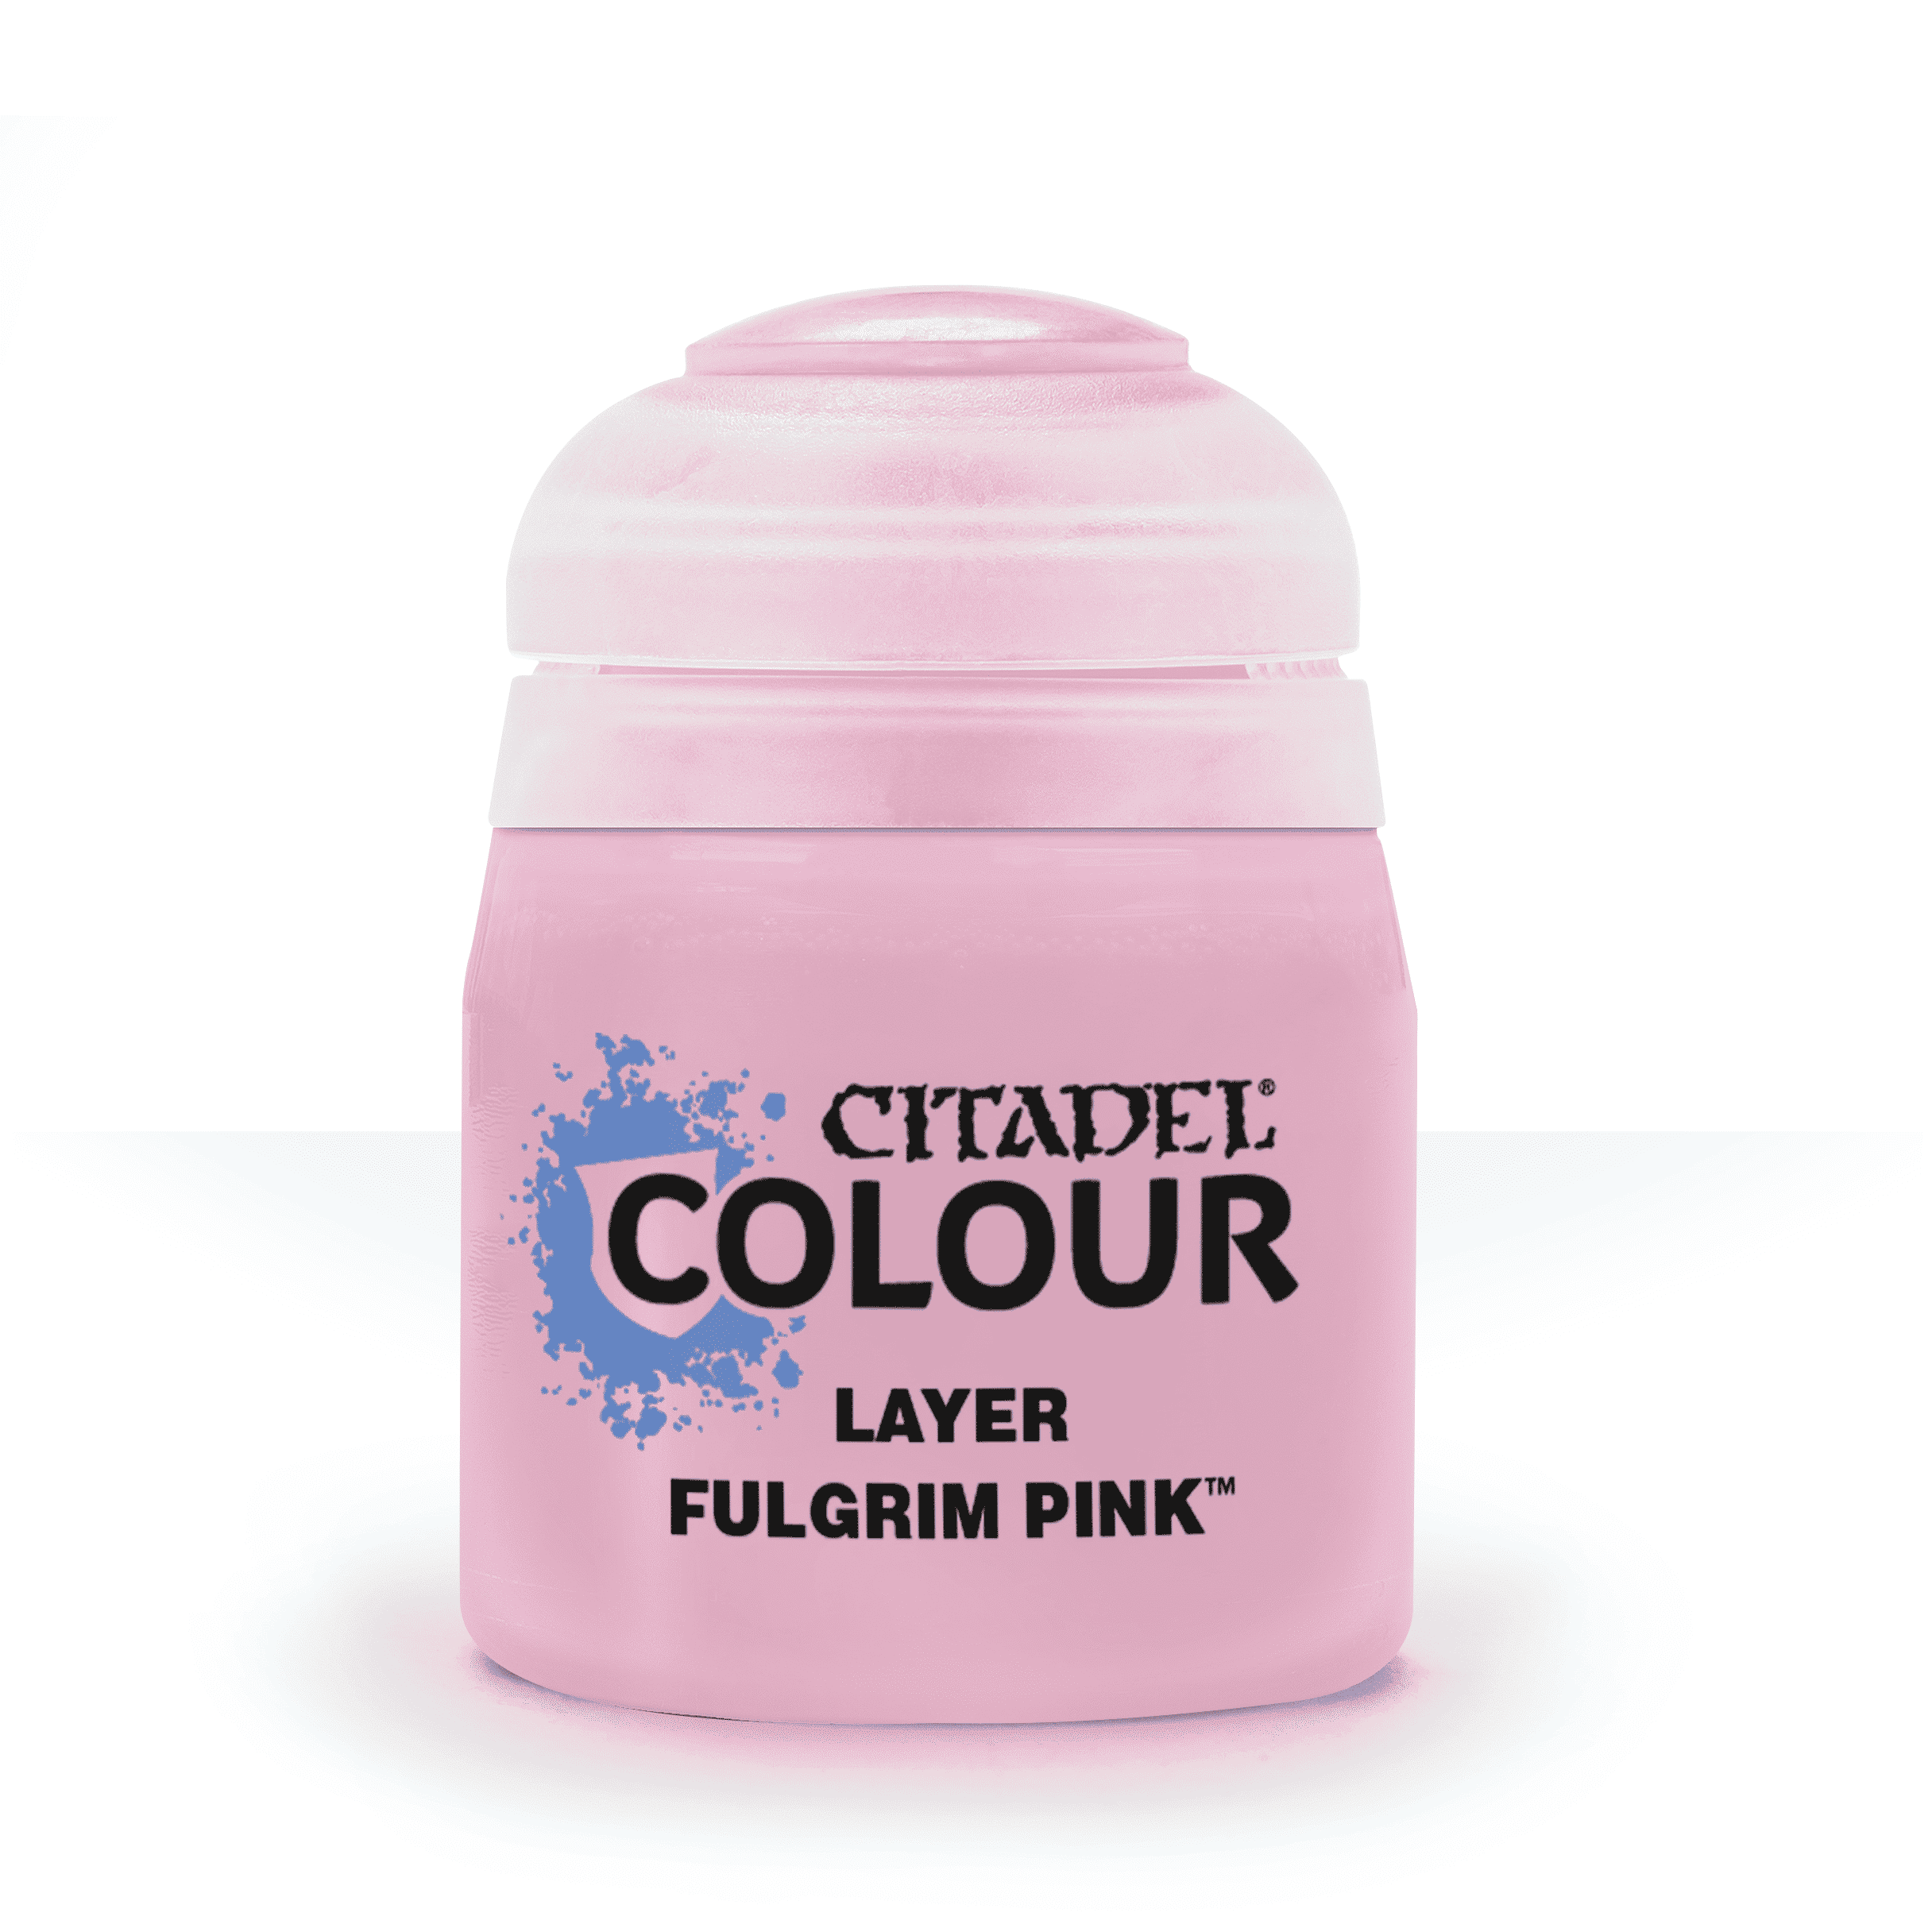 LAYER: FULGRIM PINK – Northumbrian Tin Soldier